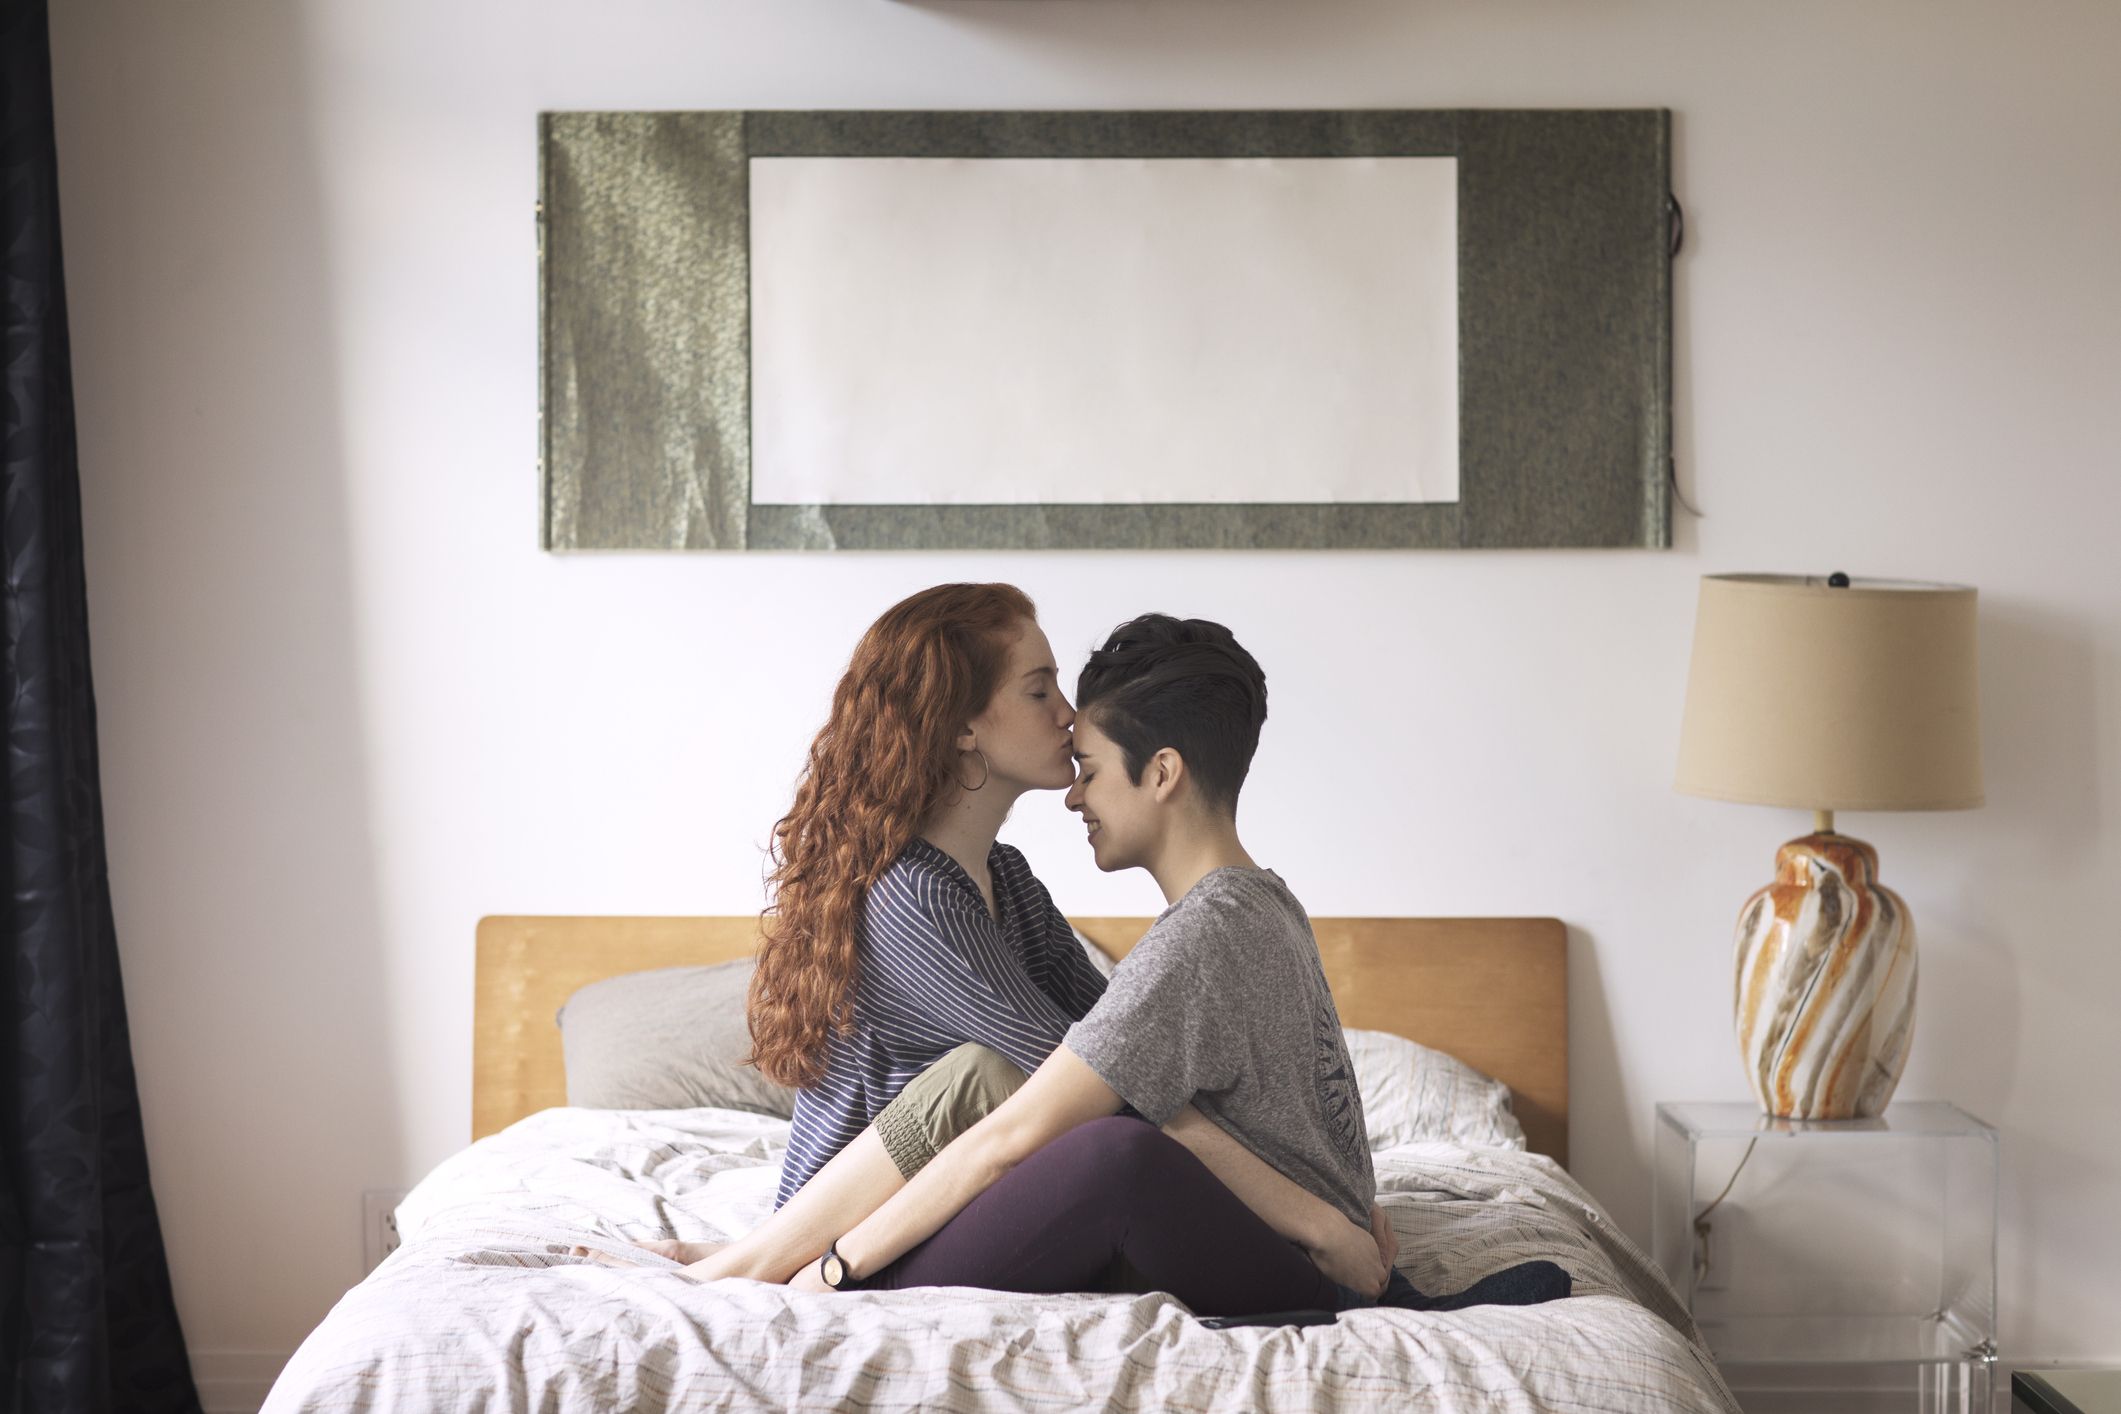 What Does a Forehead Kiss Symbolize?